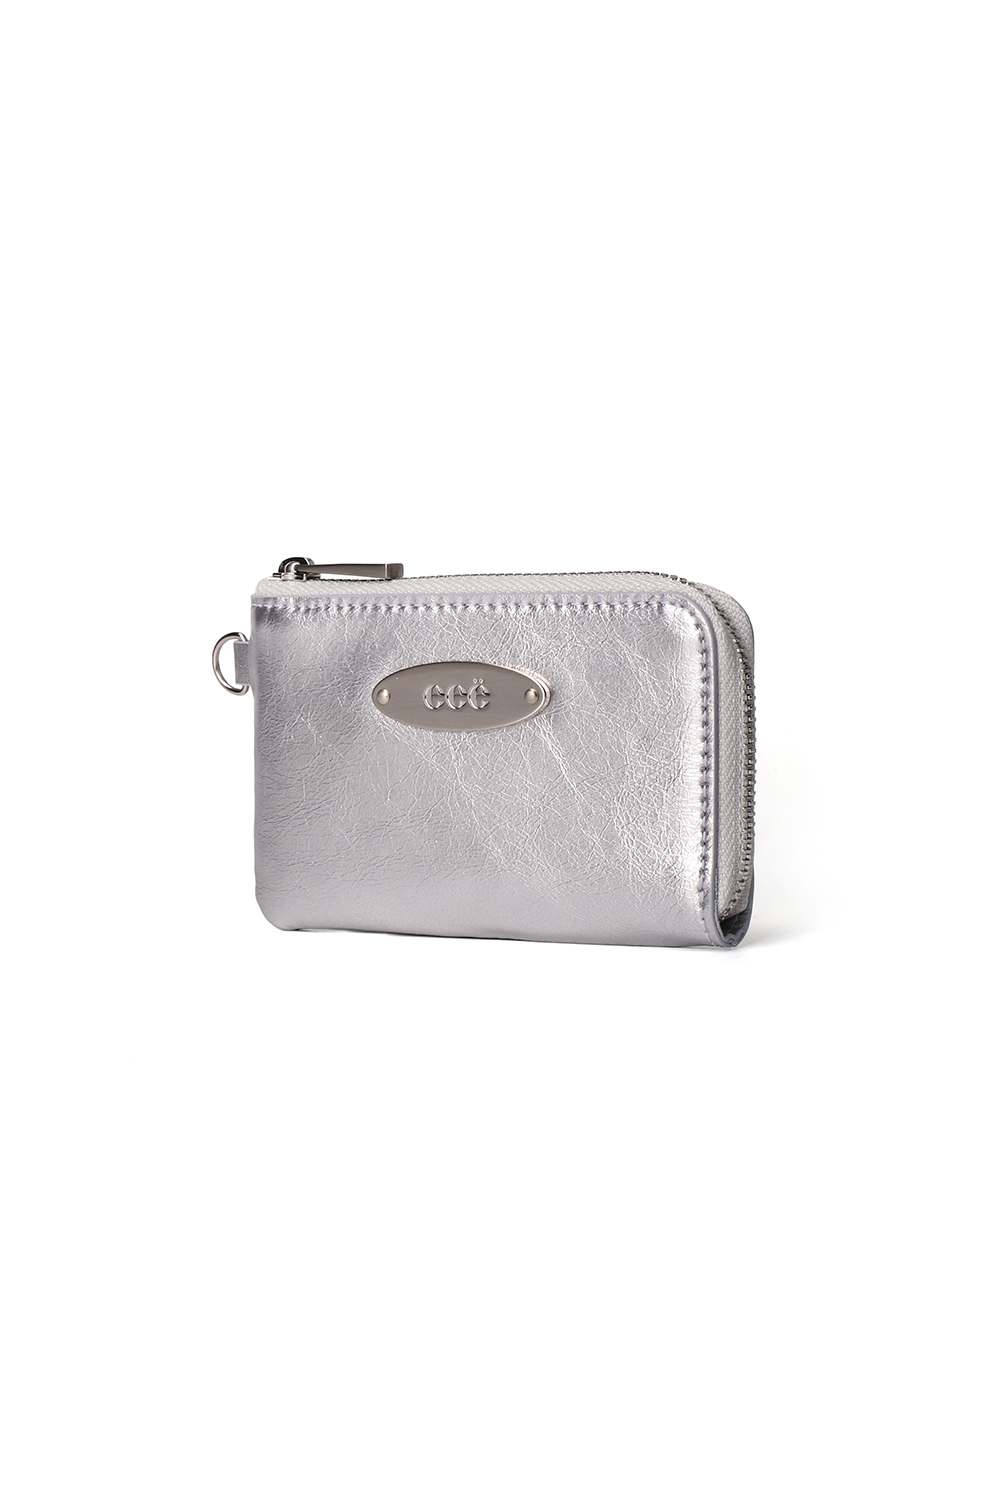 CHACHA CHAIN WALLET [SILVER]